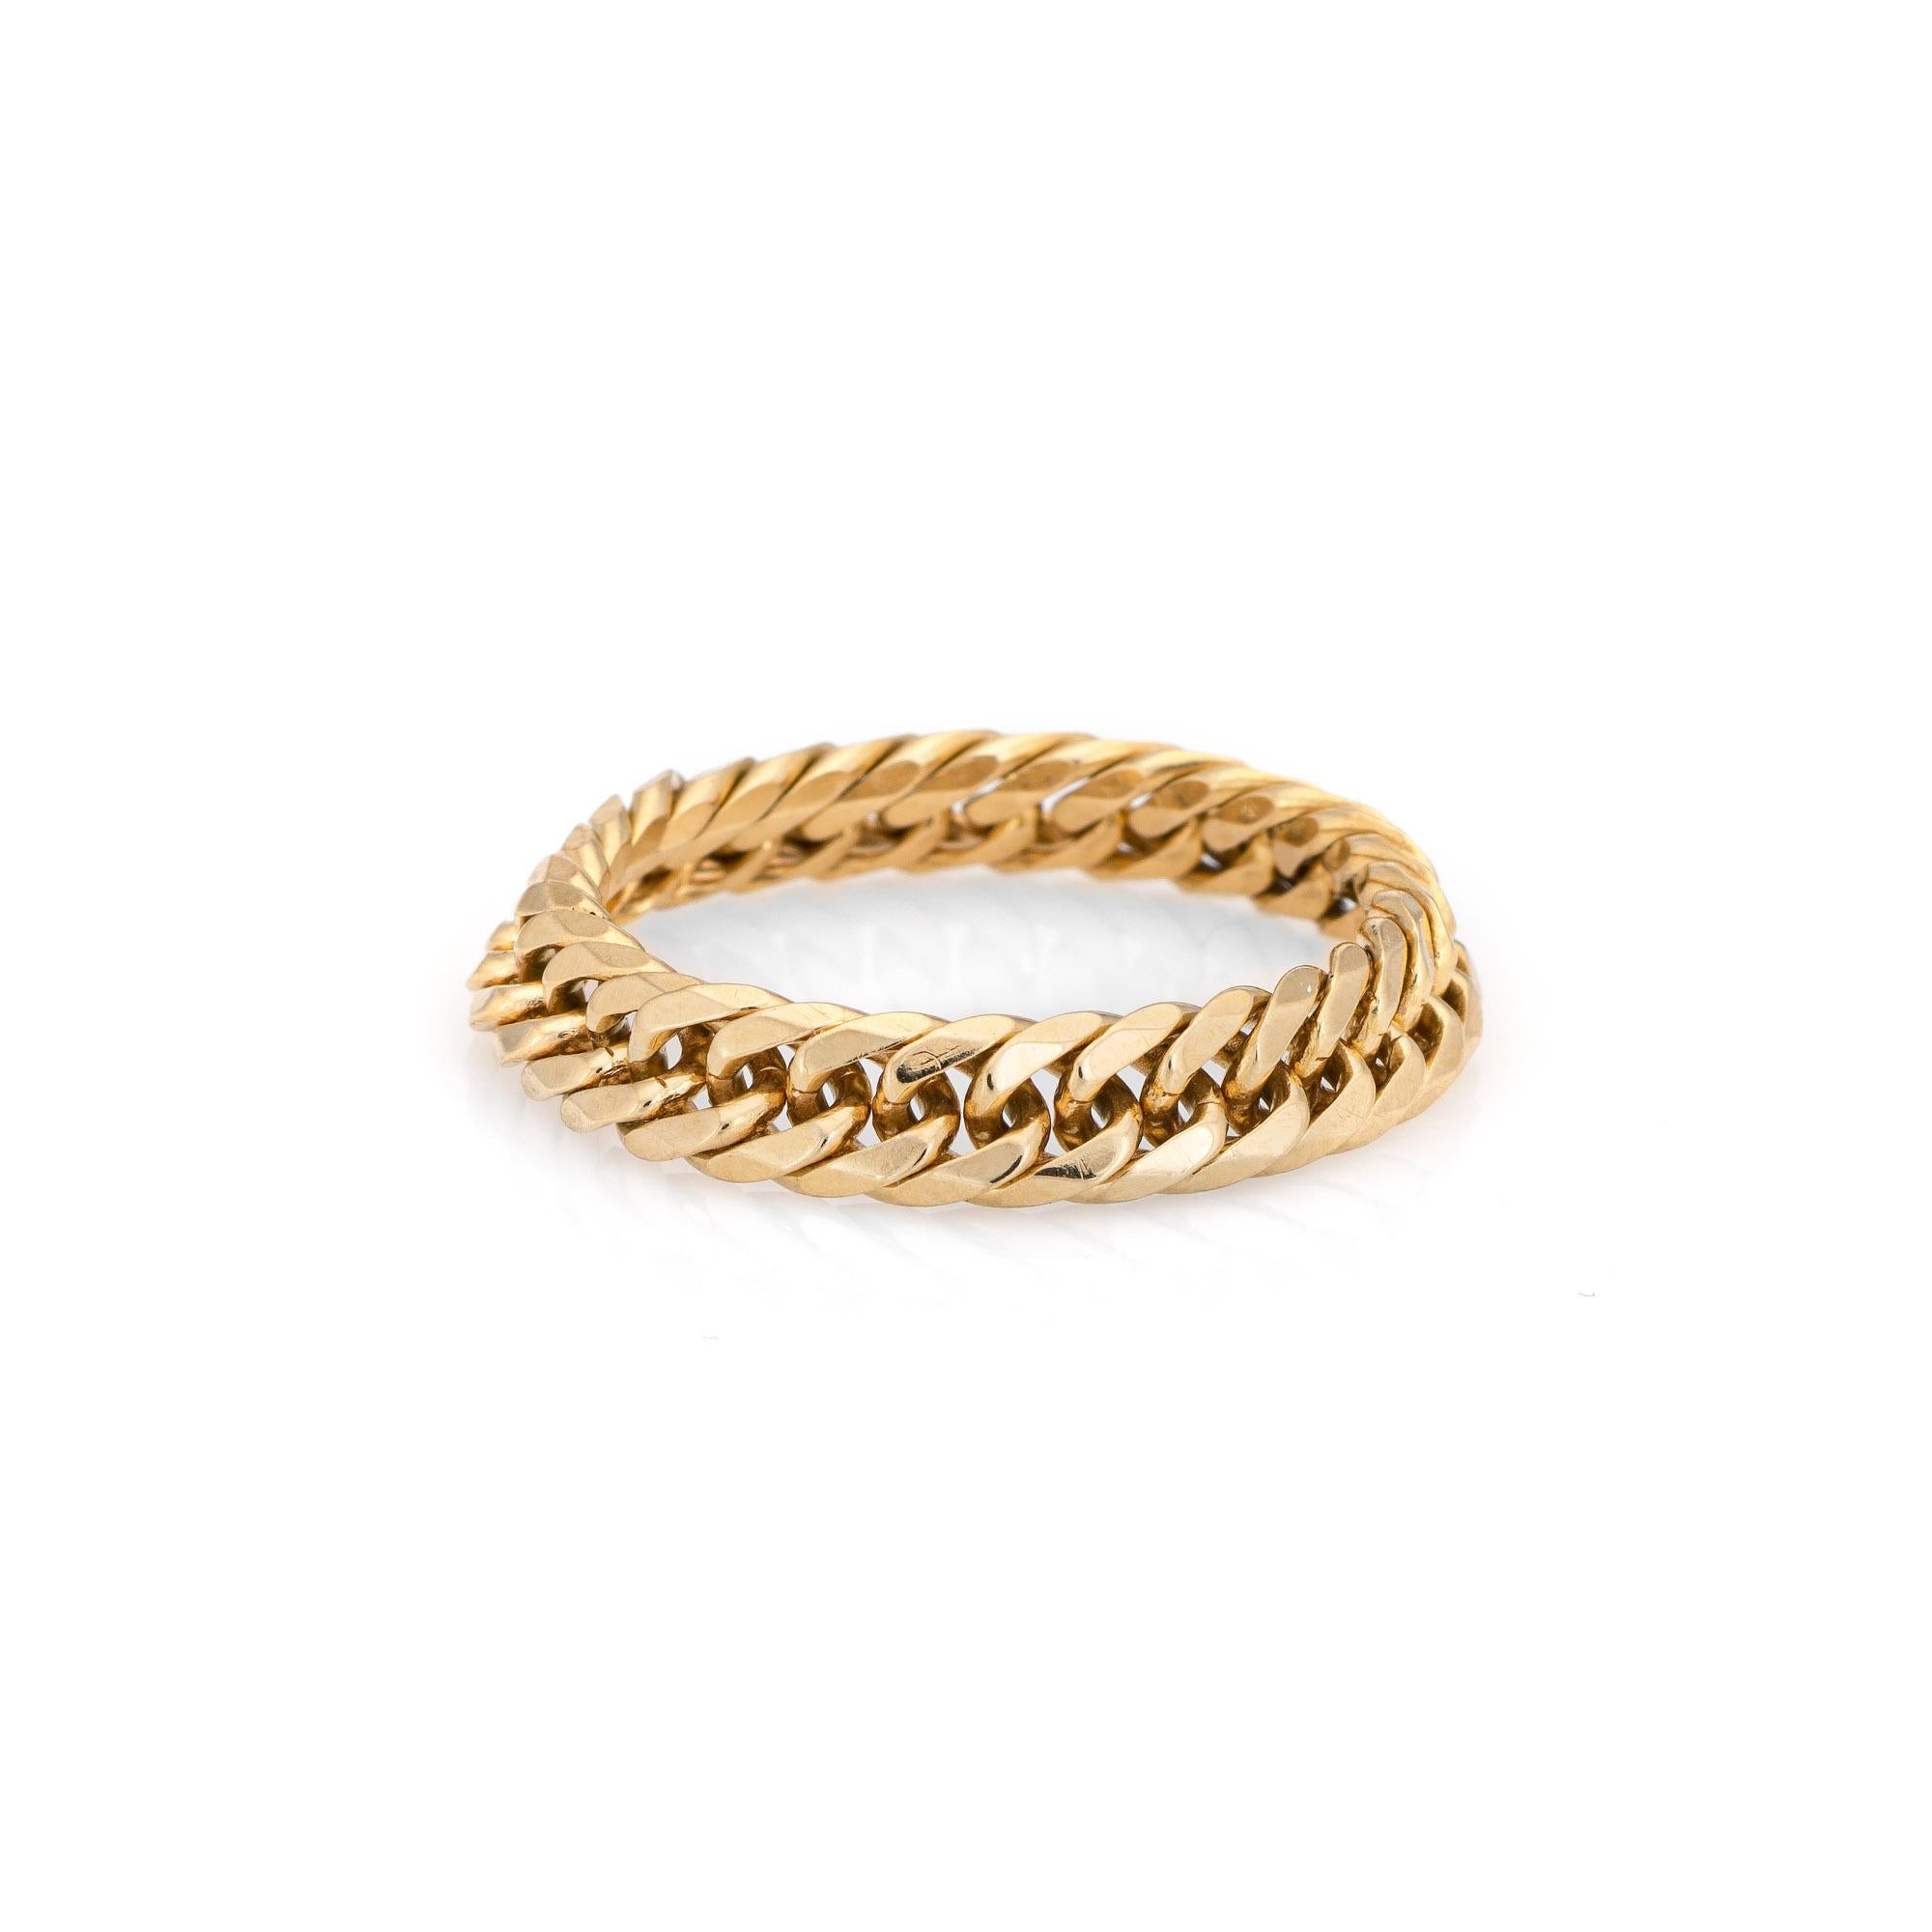 Stylish Cuban link chain ring crafted in 18 karat yellow gold. 

The chain link ring is flexible and slips easily onto the finger. The low rise band (2mm - 0.07 inches) sits comfortably on the finger. Great worn alone or stacked with your fine